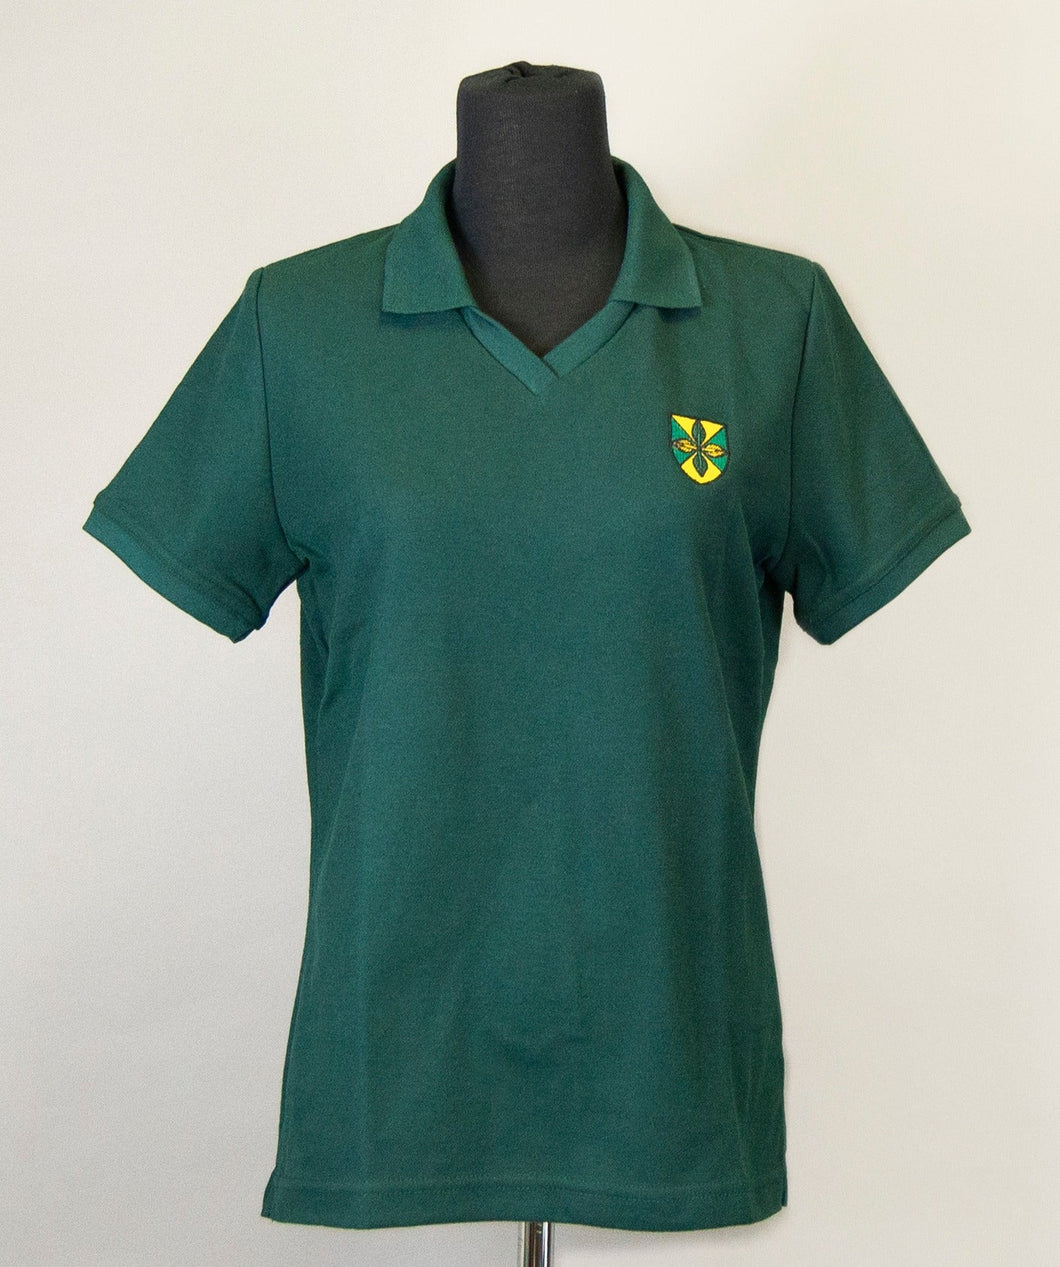 Polo Shirt - Green - Adult Sizes